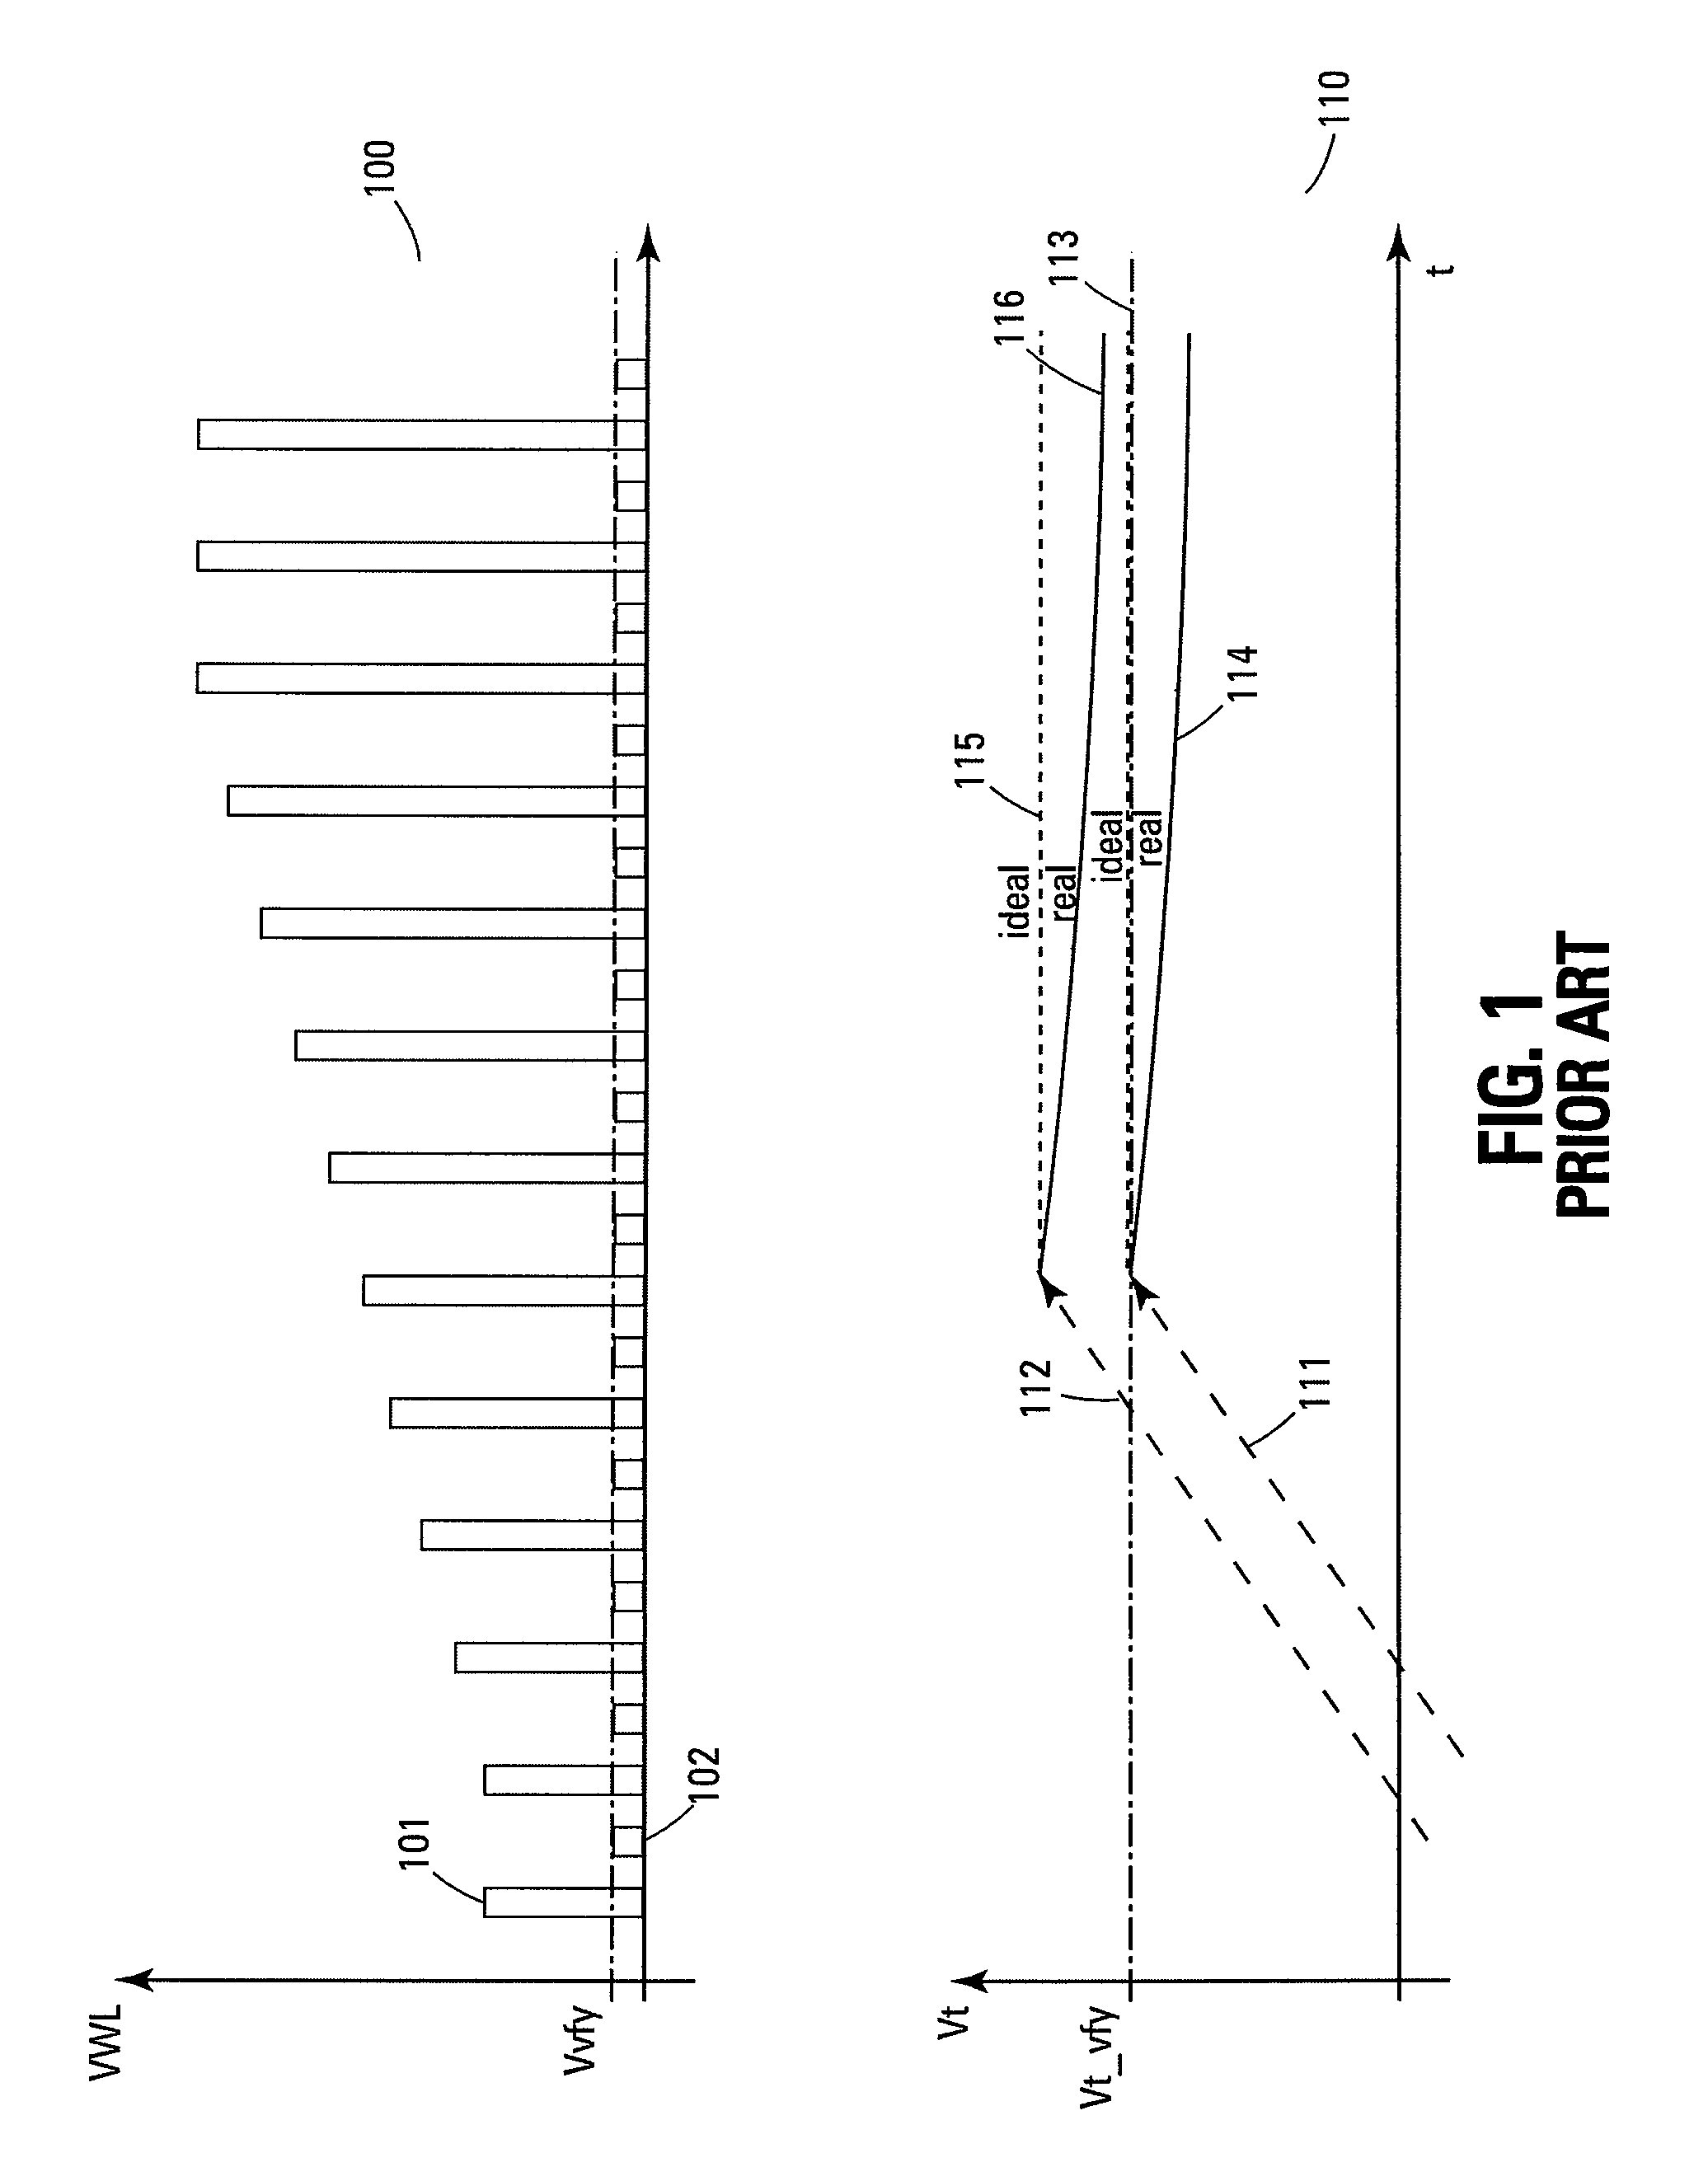 Charge loss compensation during programming of a memory device